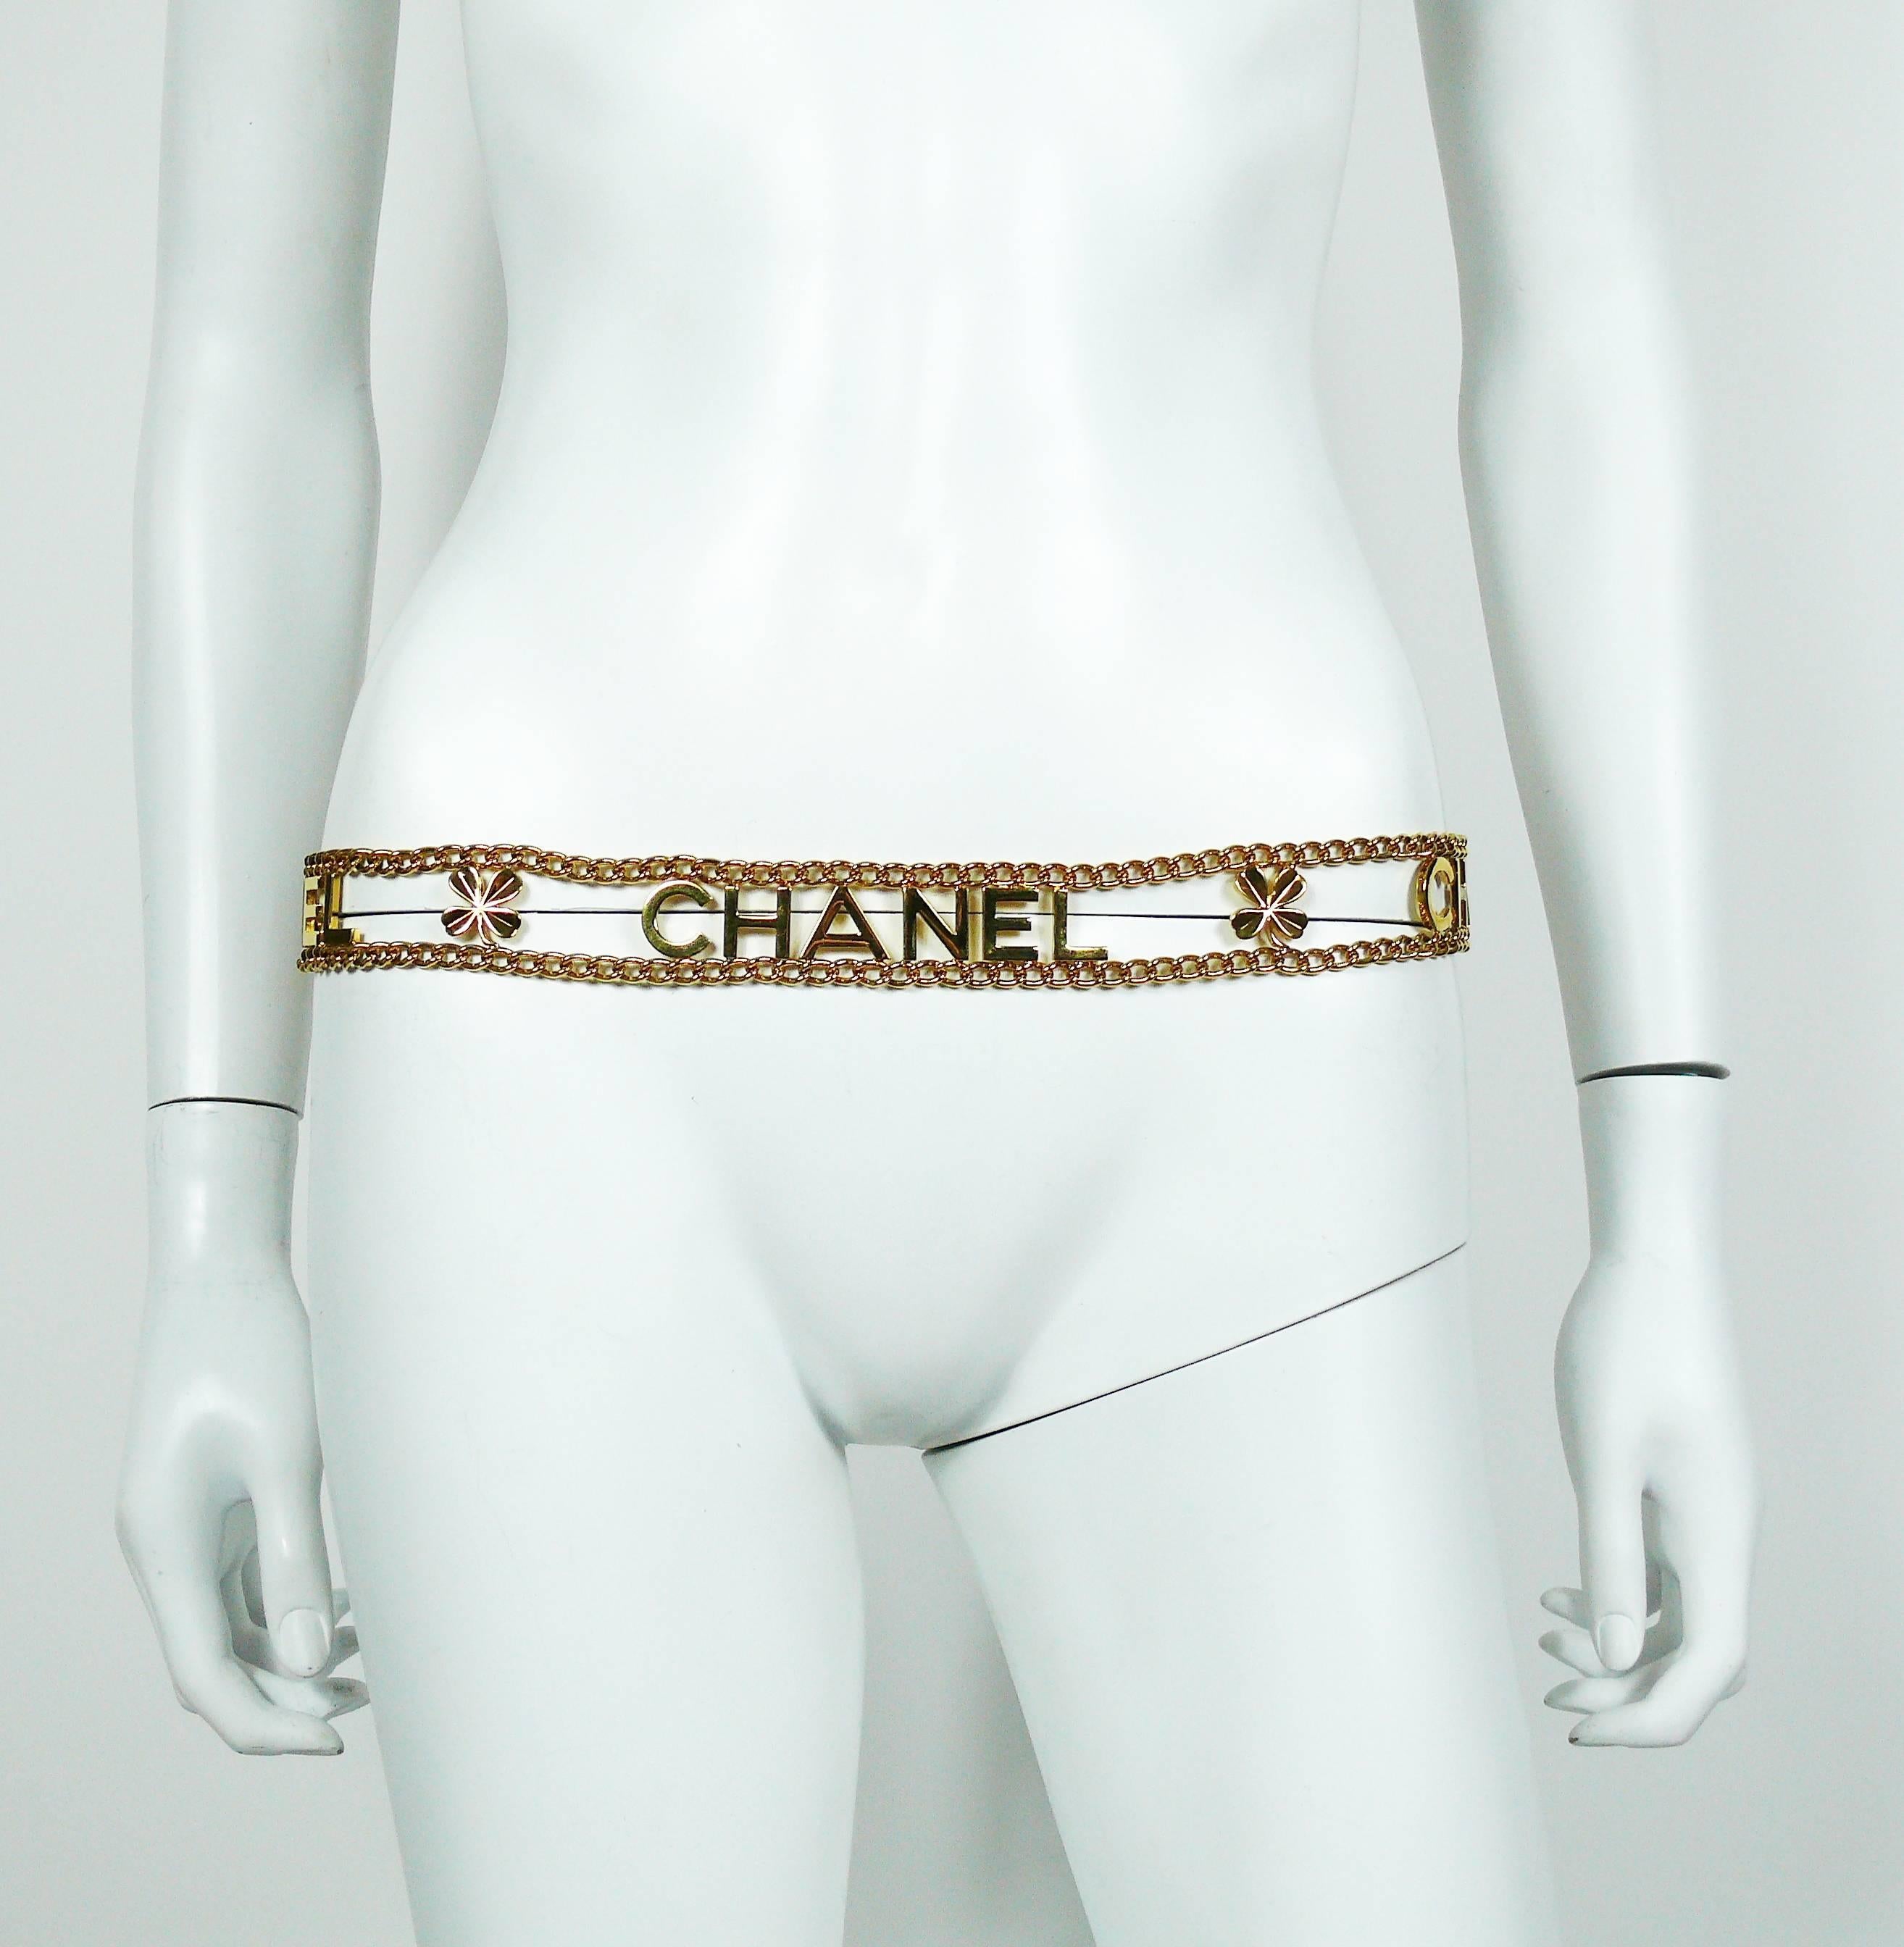 Women's Chanel Vintage Gold Toned Chain Belt with Chanel Letters and Clovers, 1998 